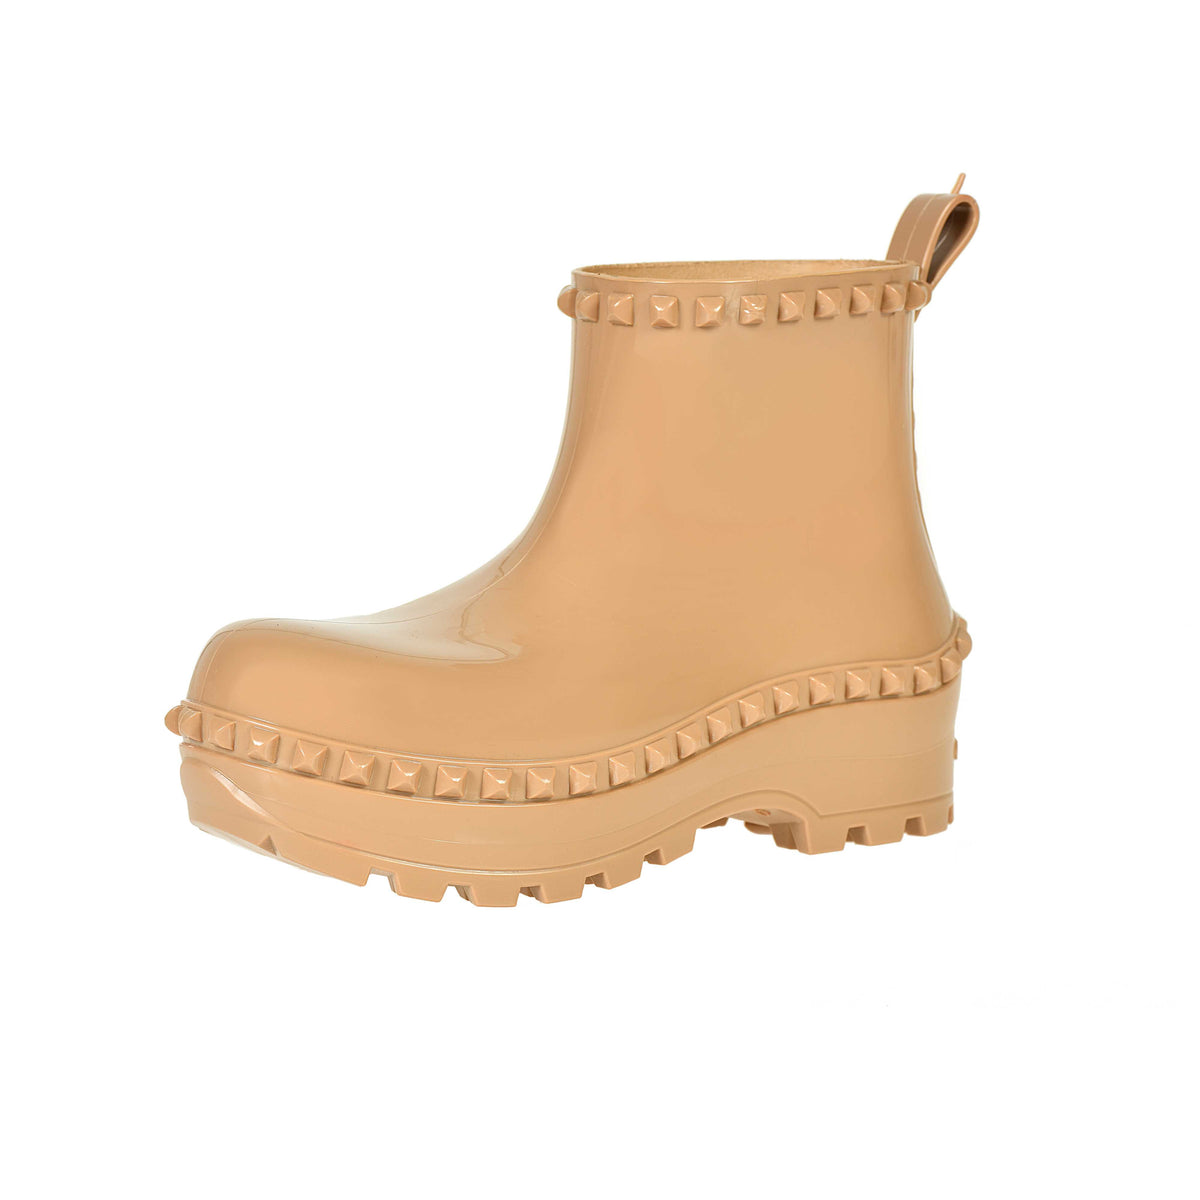 Studded Carmen Sol jelly boots for women in color nude